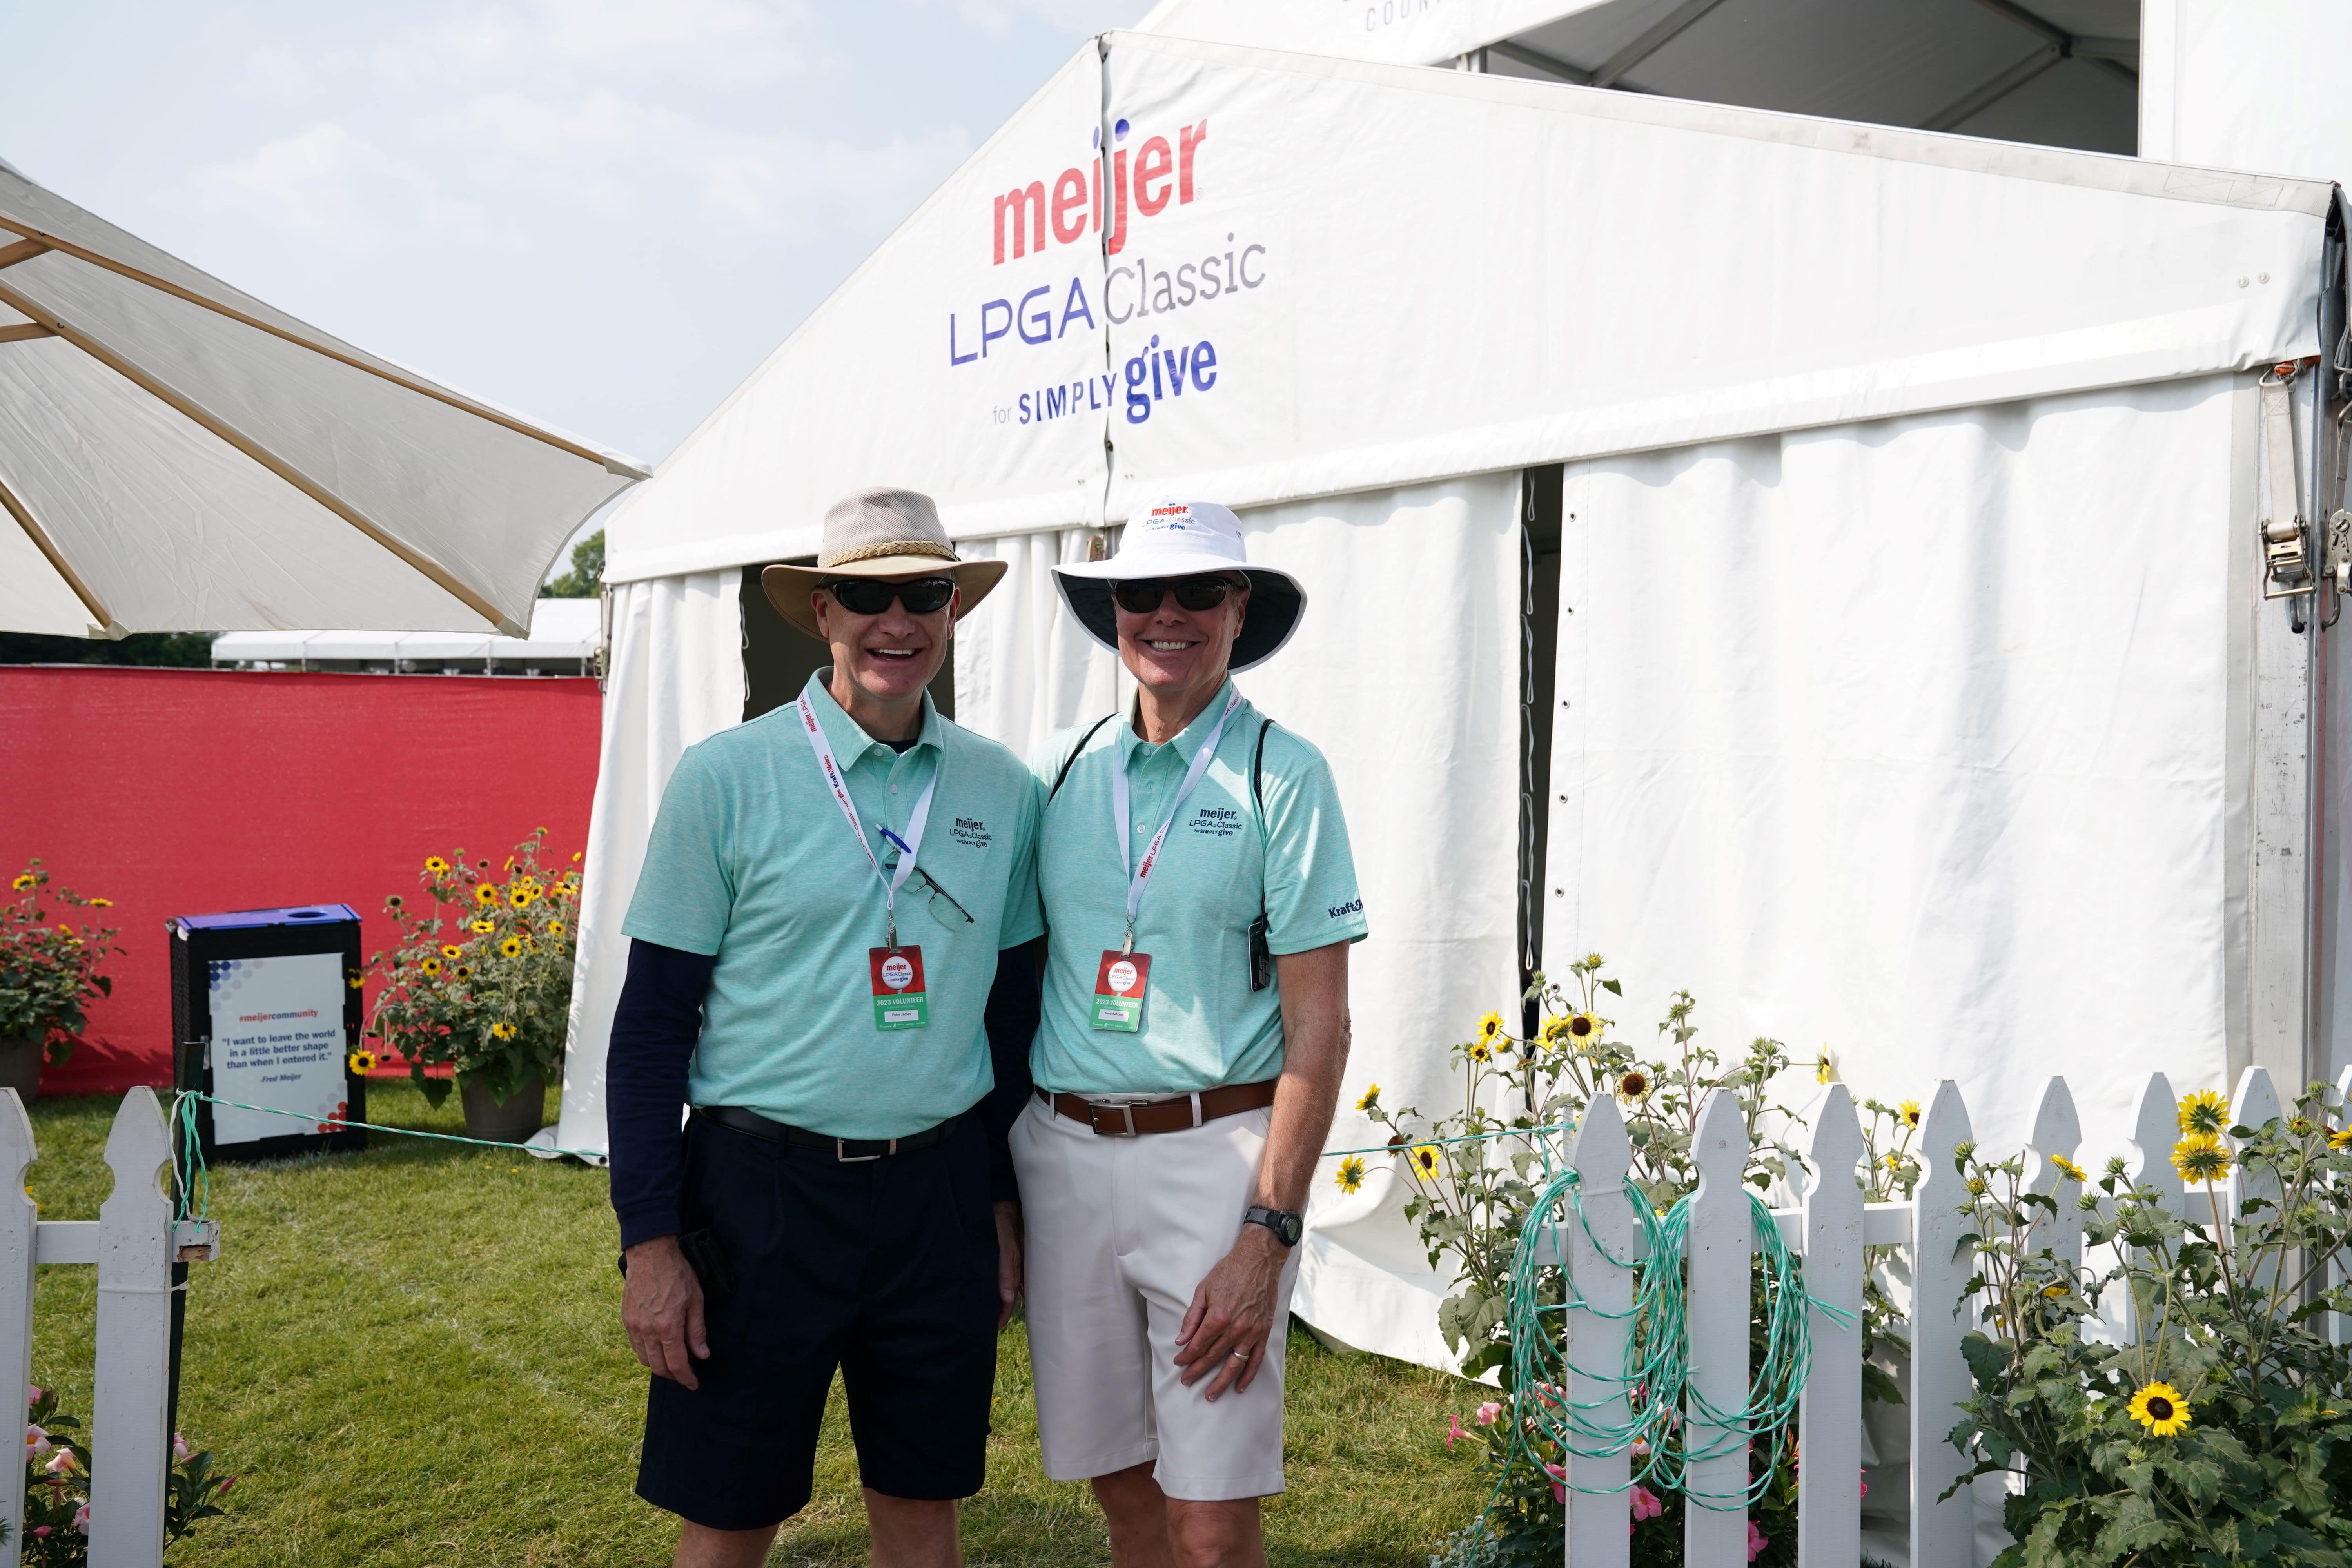  Volunteer Registration Now Open for 10th Meijer LPGA Classic for Simply Give 